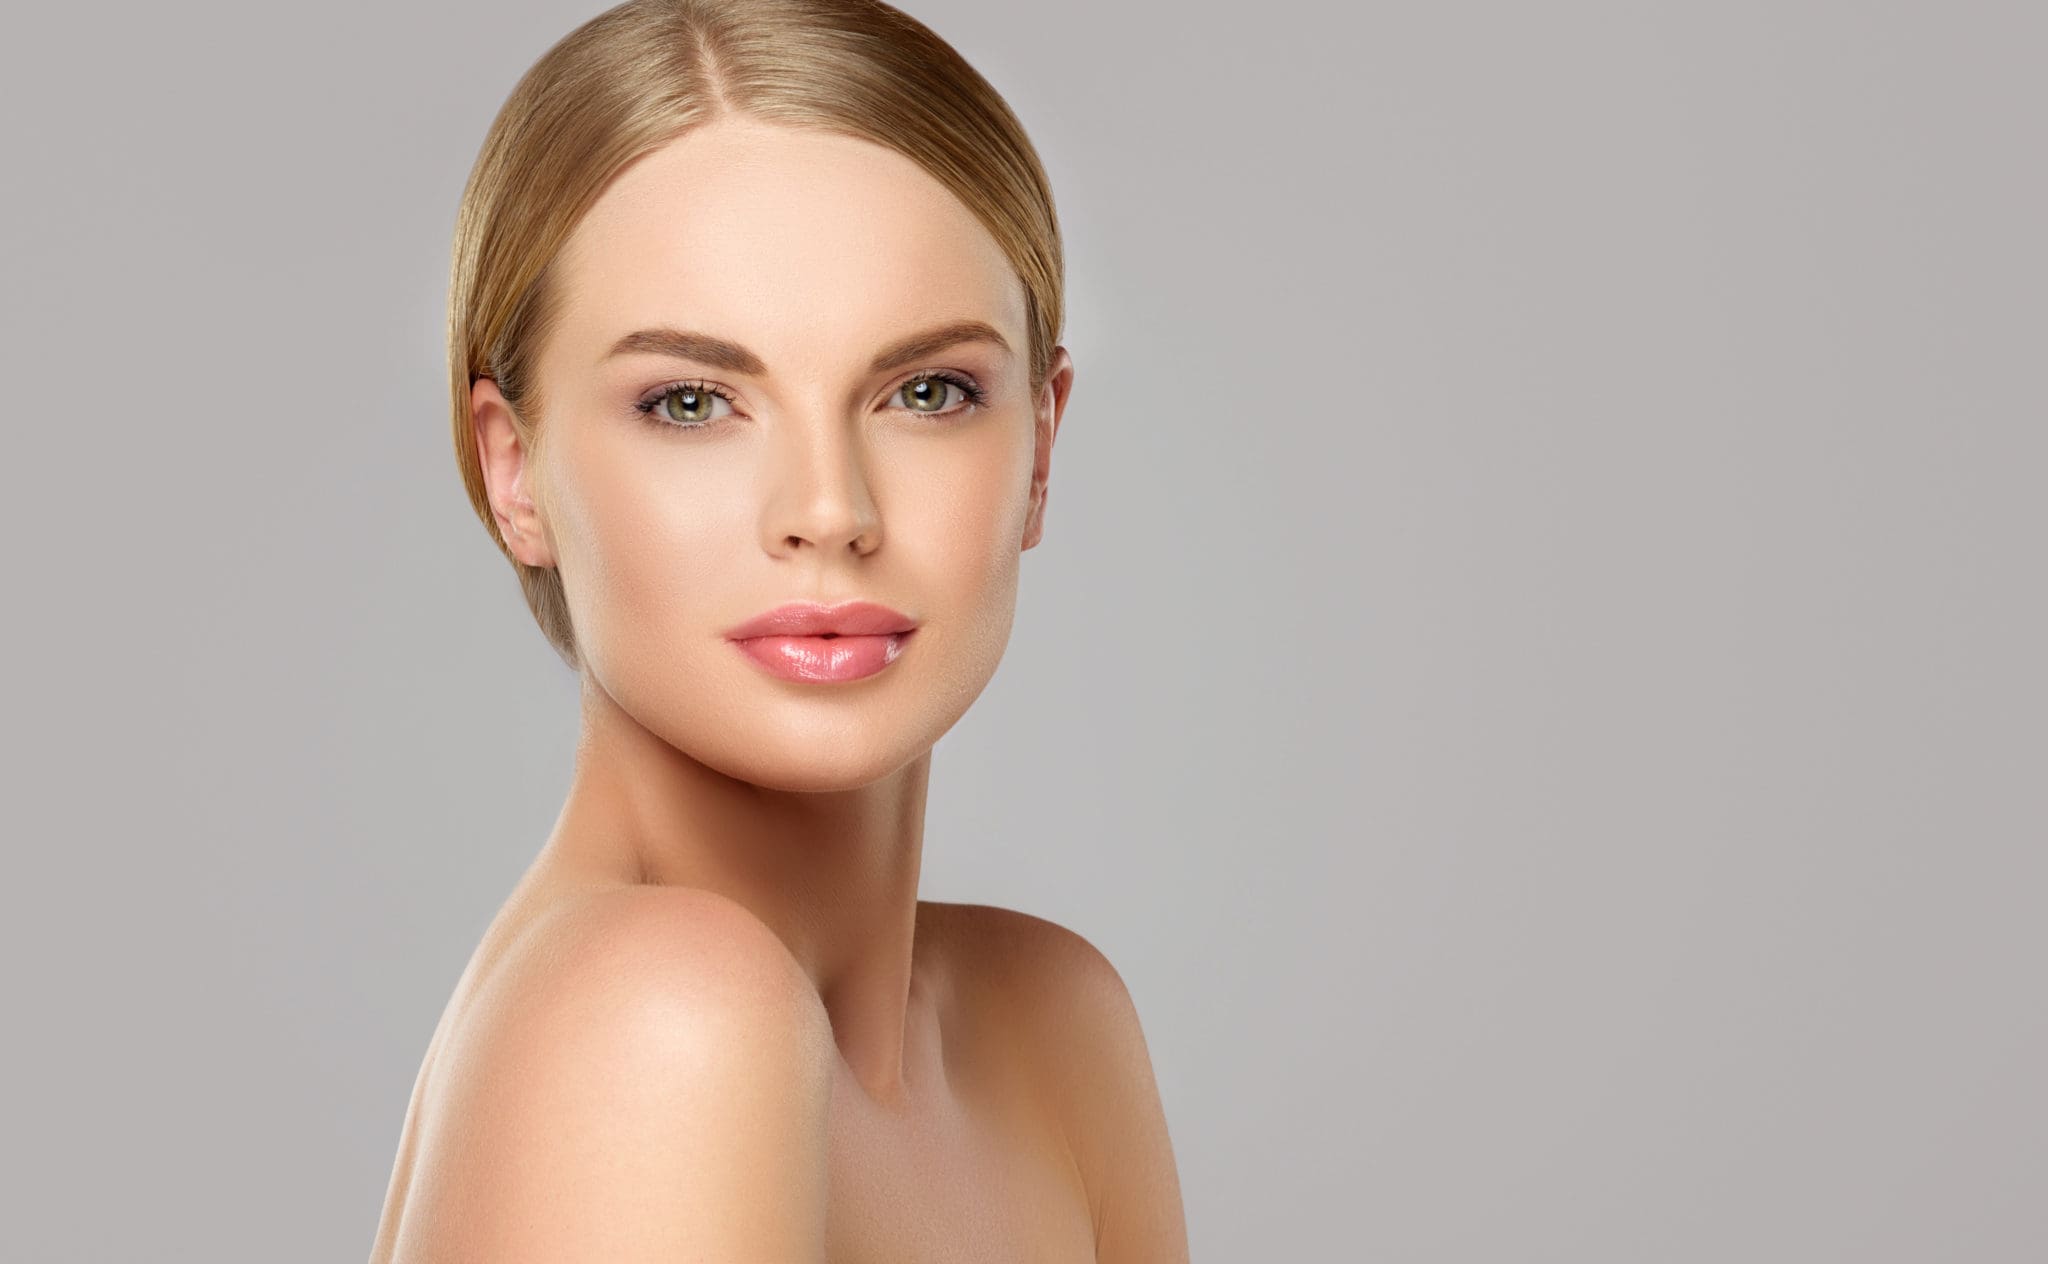 What Are Dermal Fillers